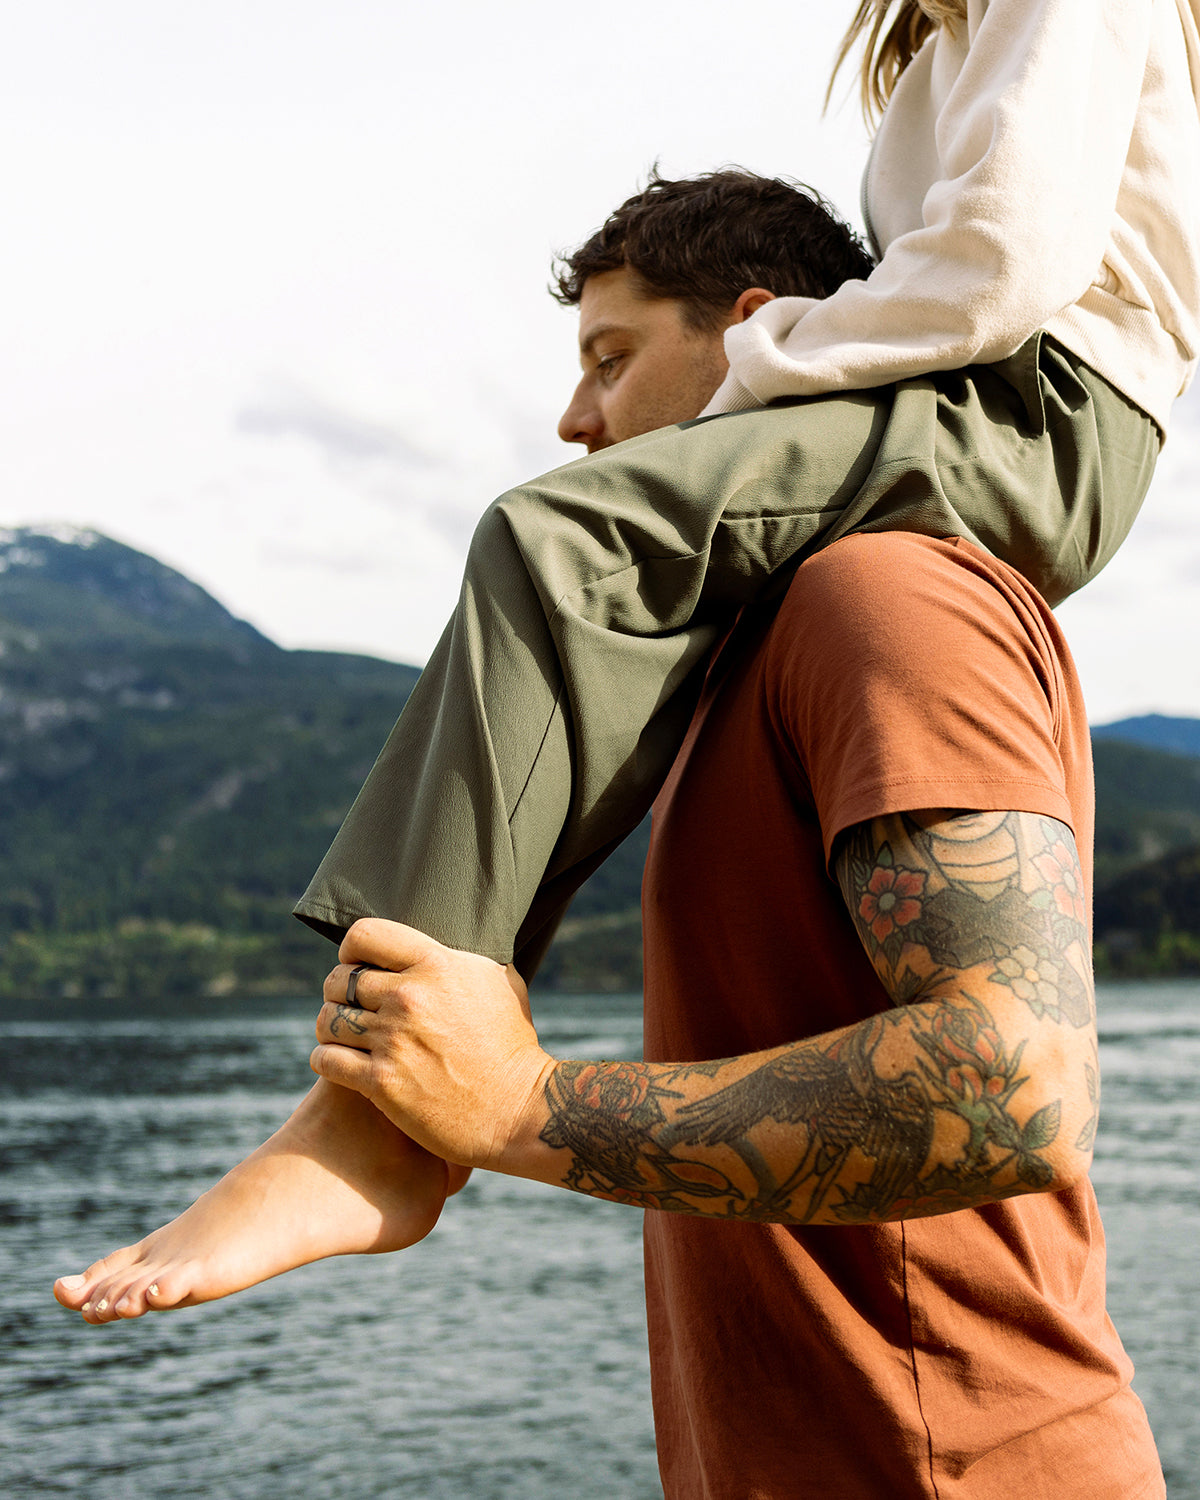 A man with tattoos carries a woman on his shoulders by a large scenic lake.